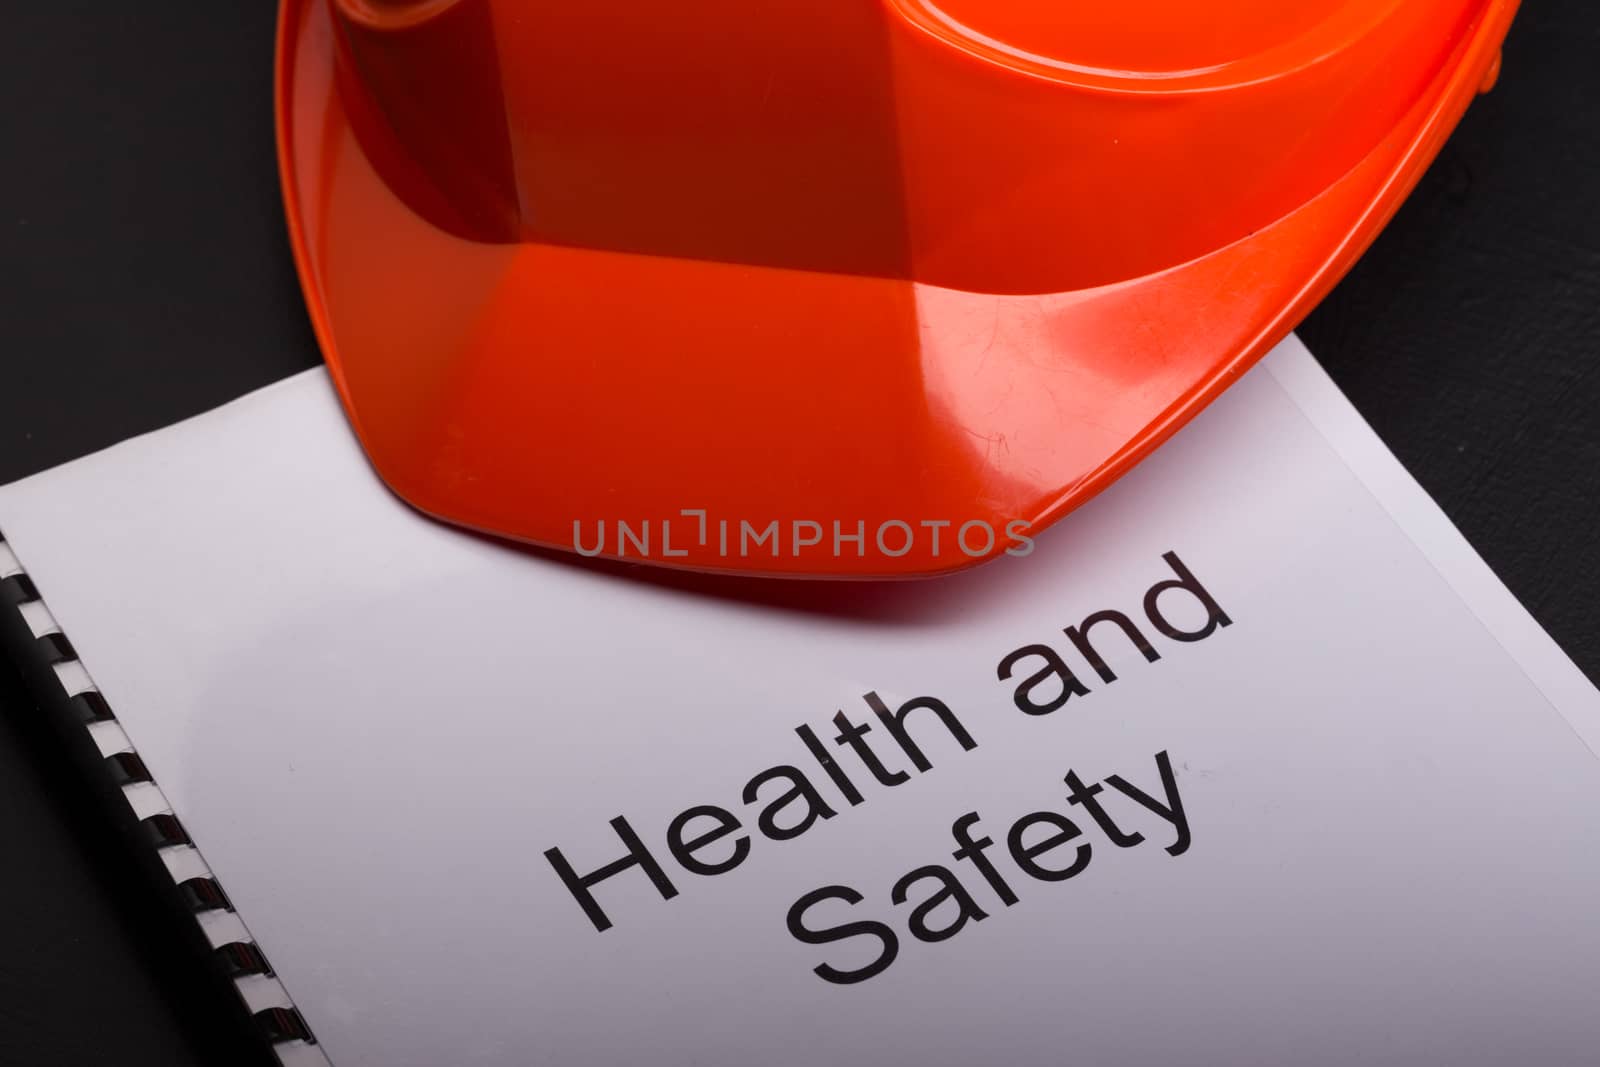 Health and safety register with helmet by Garsya